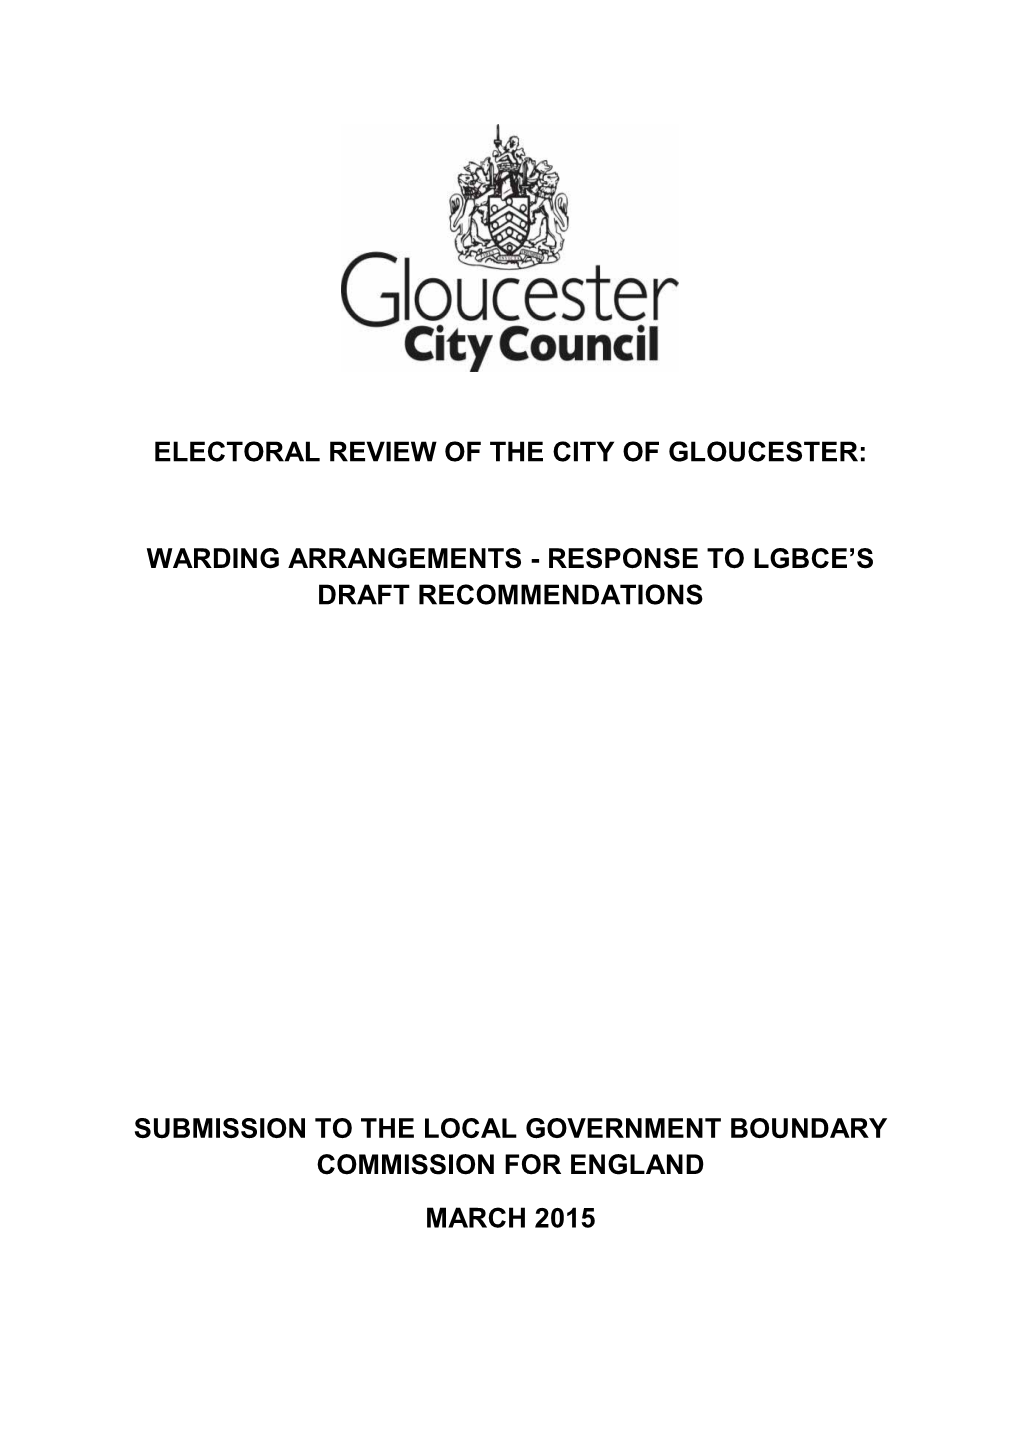 Gloucester City Council Should Have 39 Councillors in the Future, Three More Than the Current Arrangements